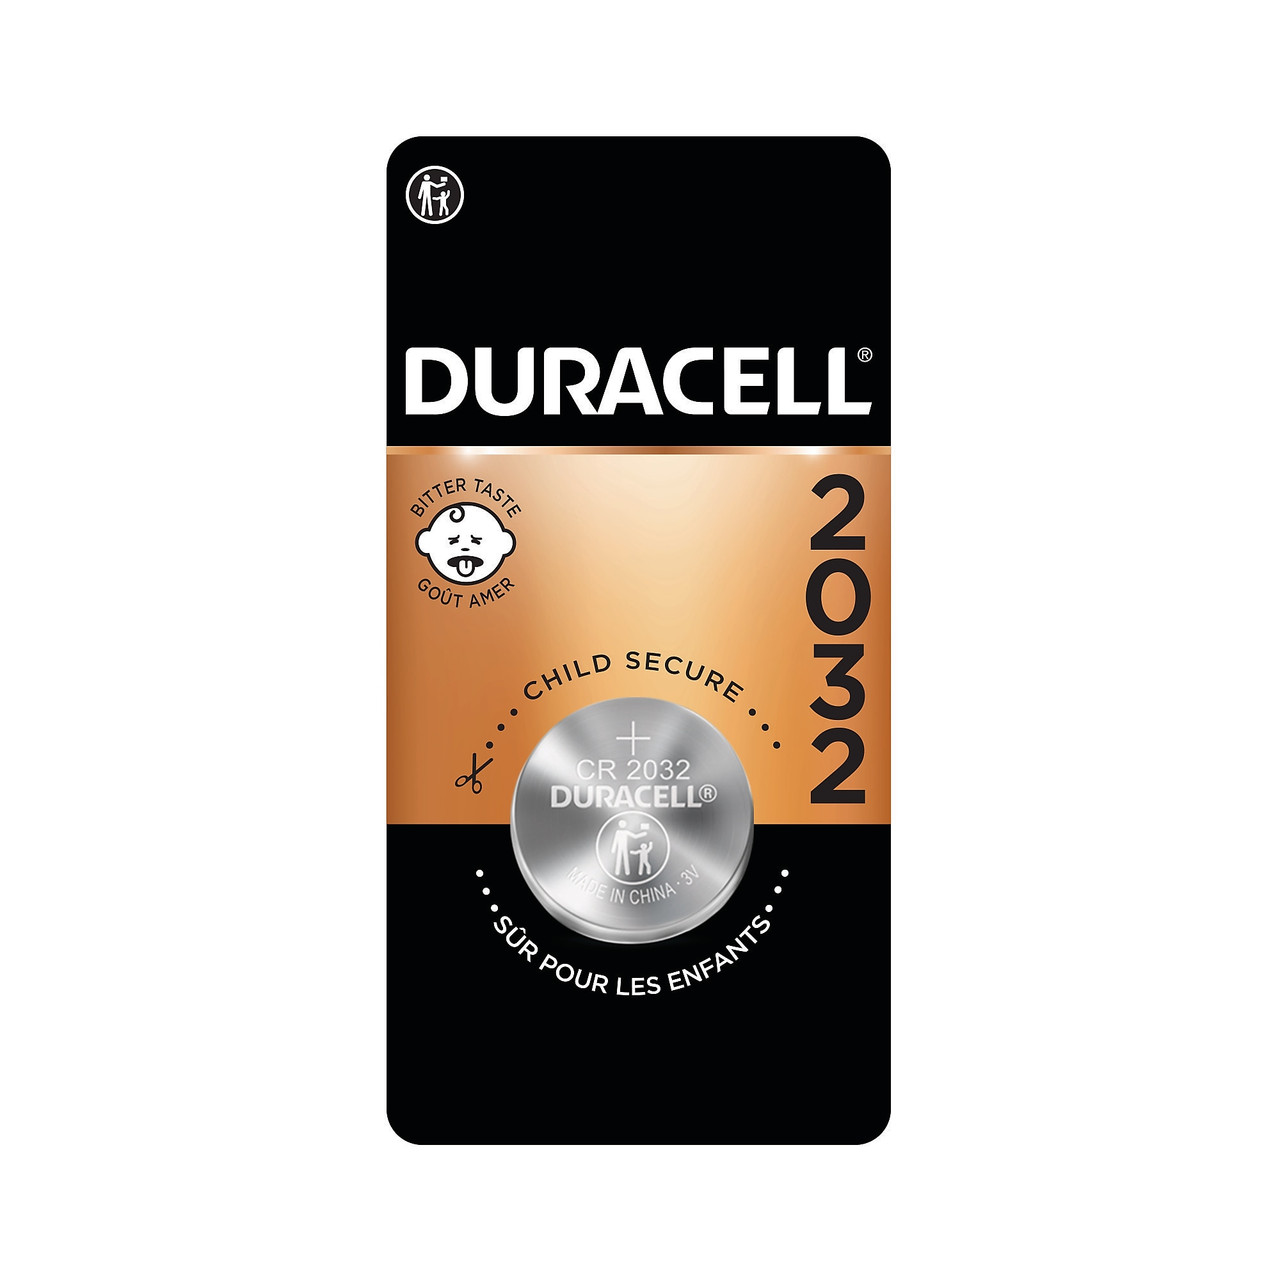 Duracell 2032 3V Lithium Coin Cell Battery 2 Pack